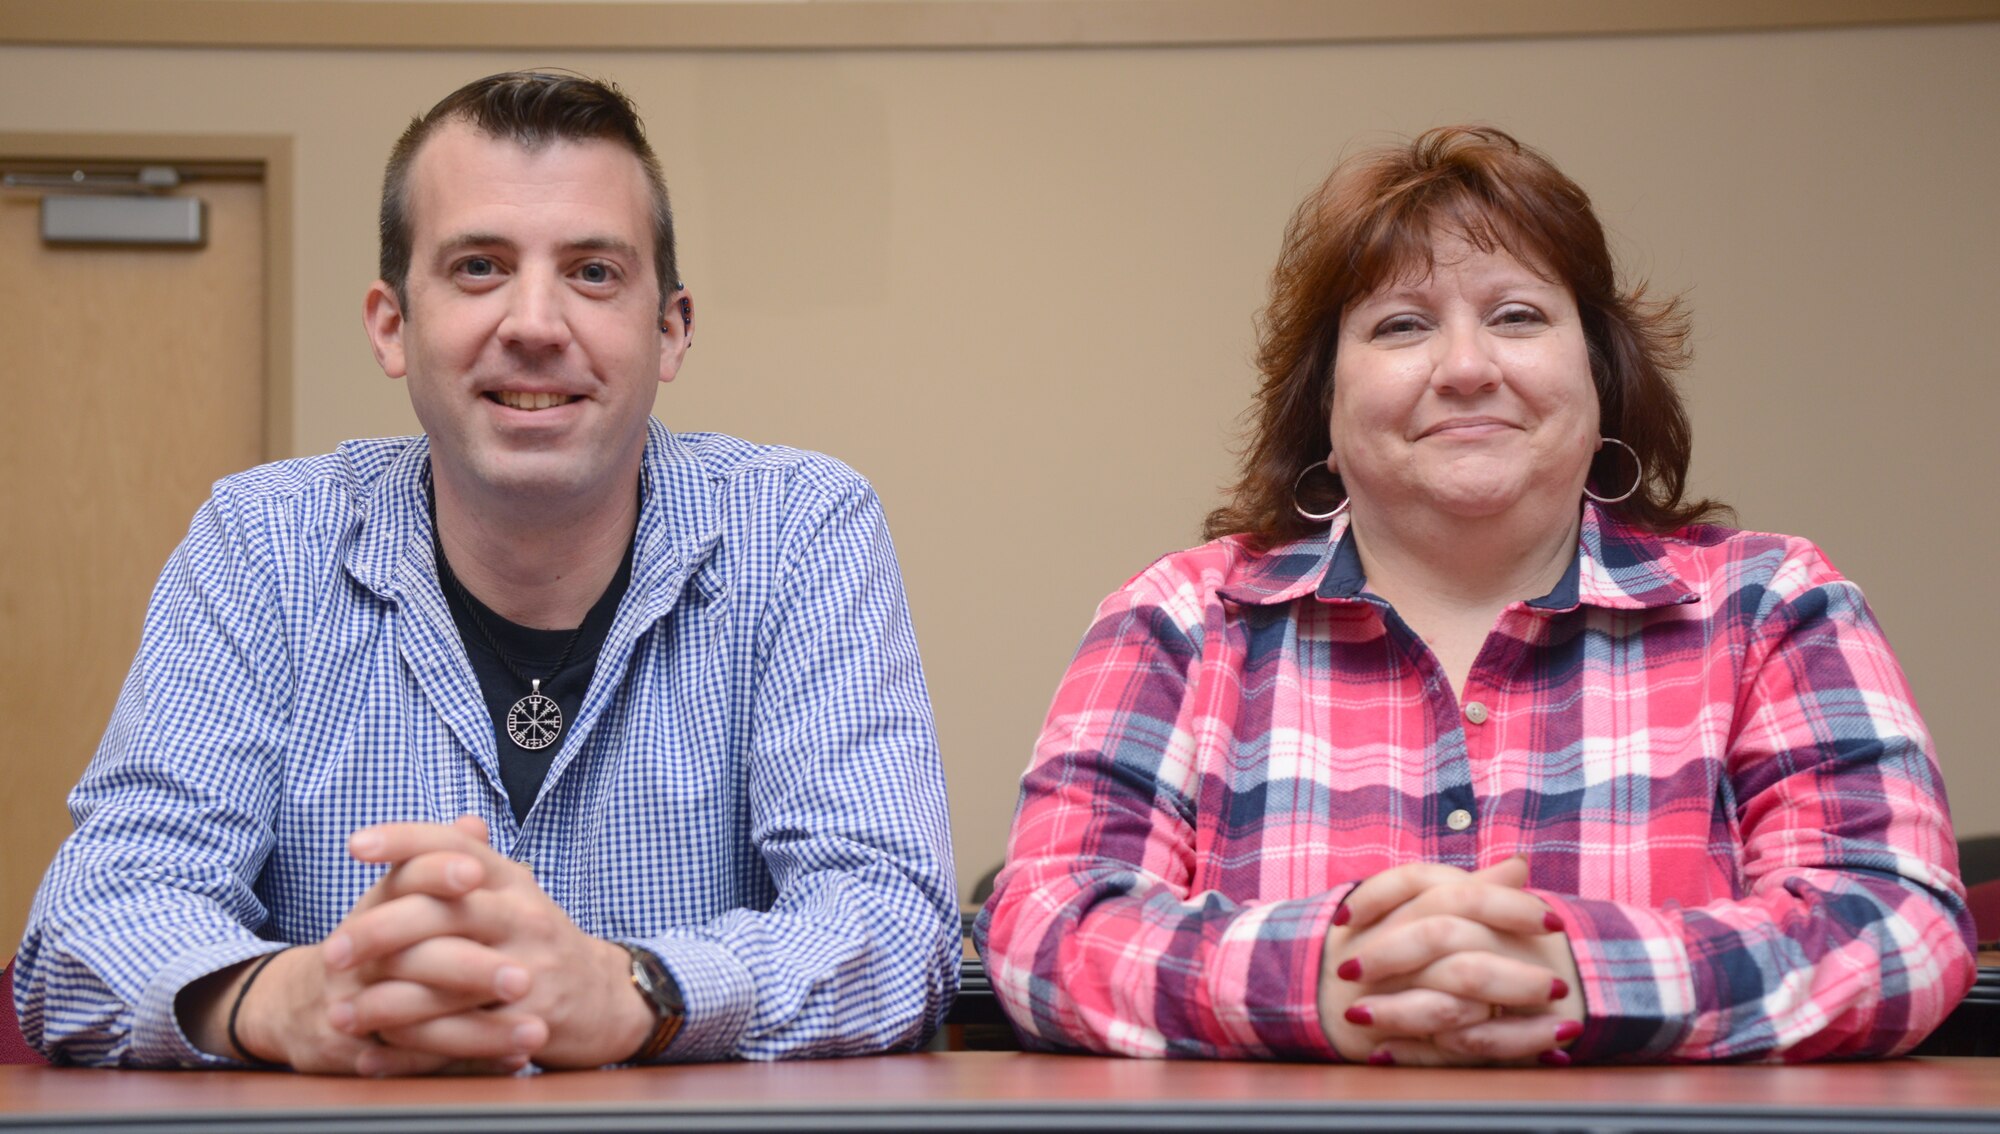 From left, Tinker Air Force Base’s Exceptional Family Member Program Coordinators Joshua Kever, 72nd Force Support Squadron, and Sharon Noones, 552nd Operations Support Squadron, help active duty Airmen and Sailors and their families with special needs.